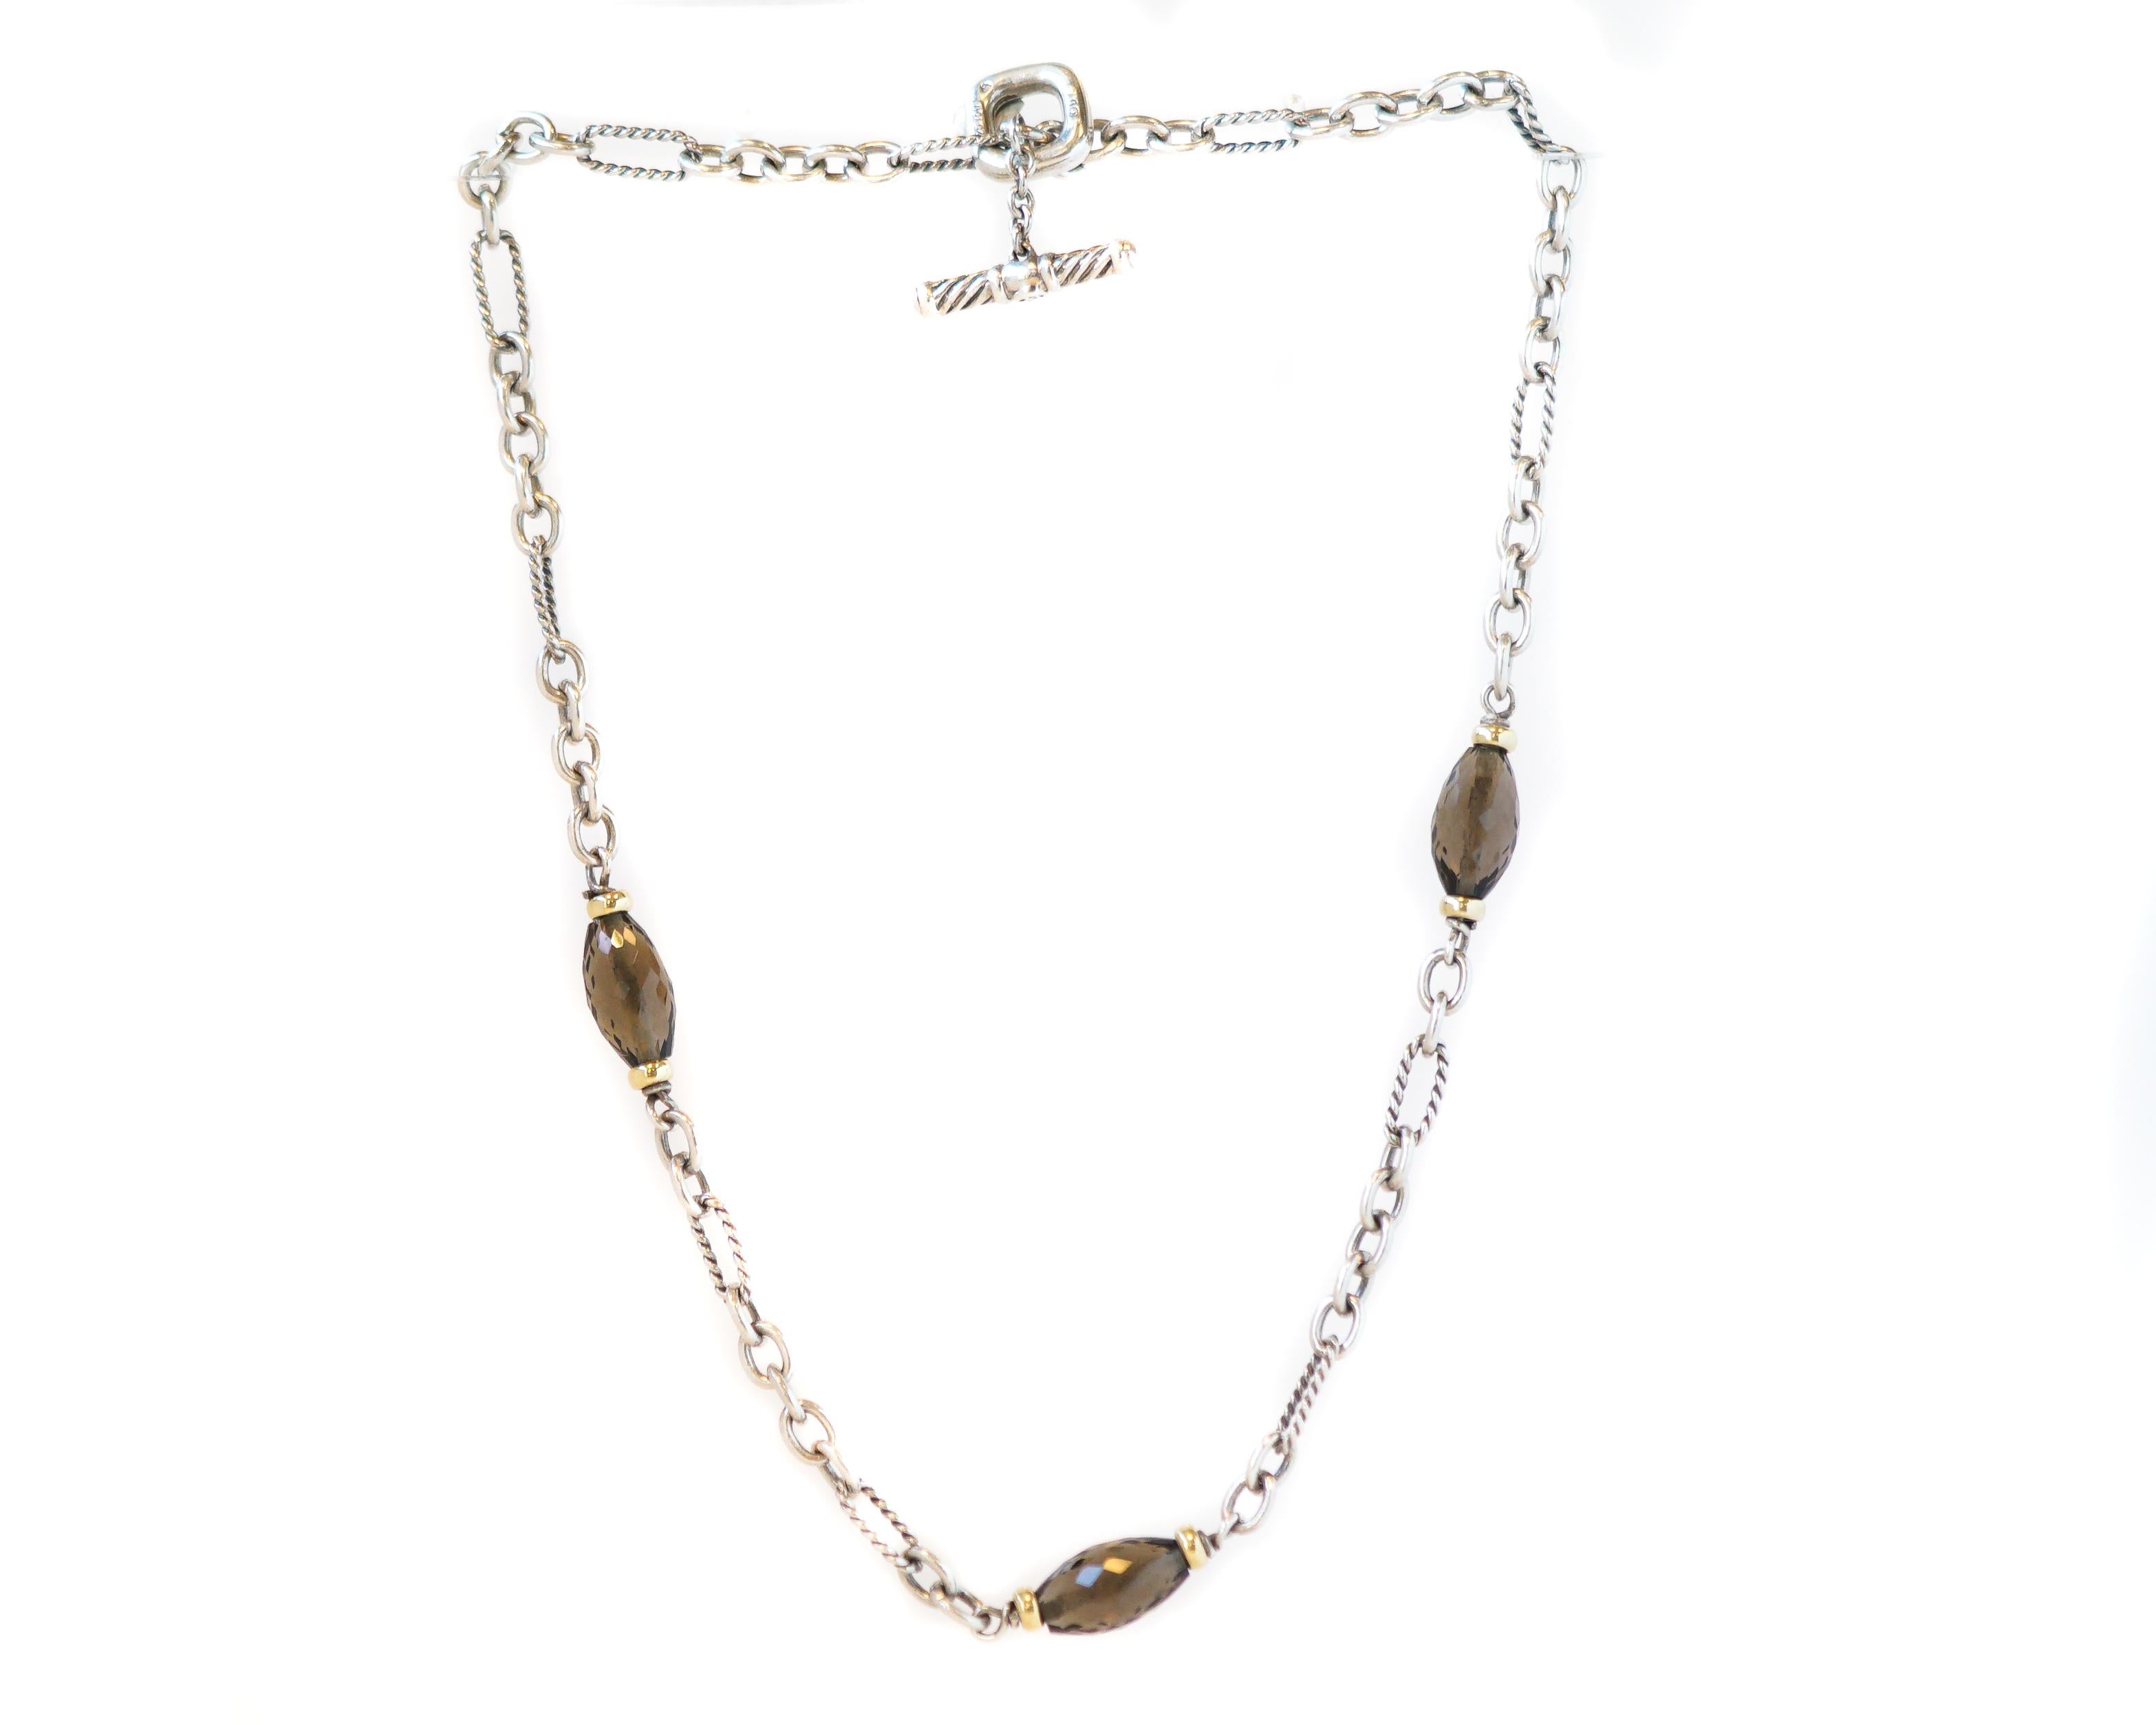 1980s David Yurman Link Necklace - Sterling Silver, 18 Karat Yellow Gold, Smoky Quartz

Features:
17 inches long
Sterling Silver Smooth and Textured Cable Links
3 Faceted Smoky Quartz Beads with 18 Karat Yellow Gold end cap beads
Toggle